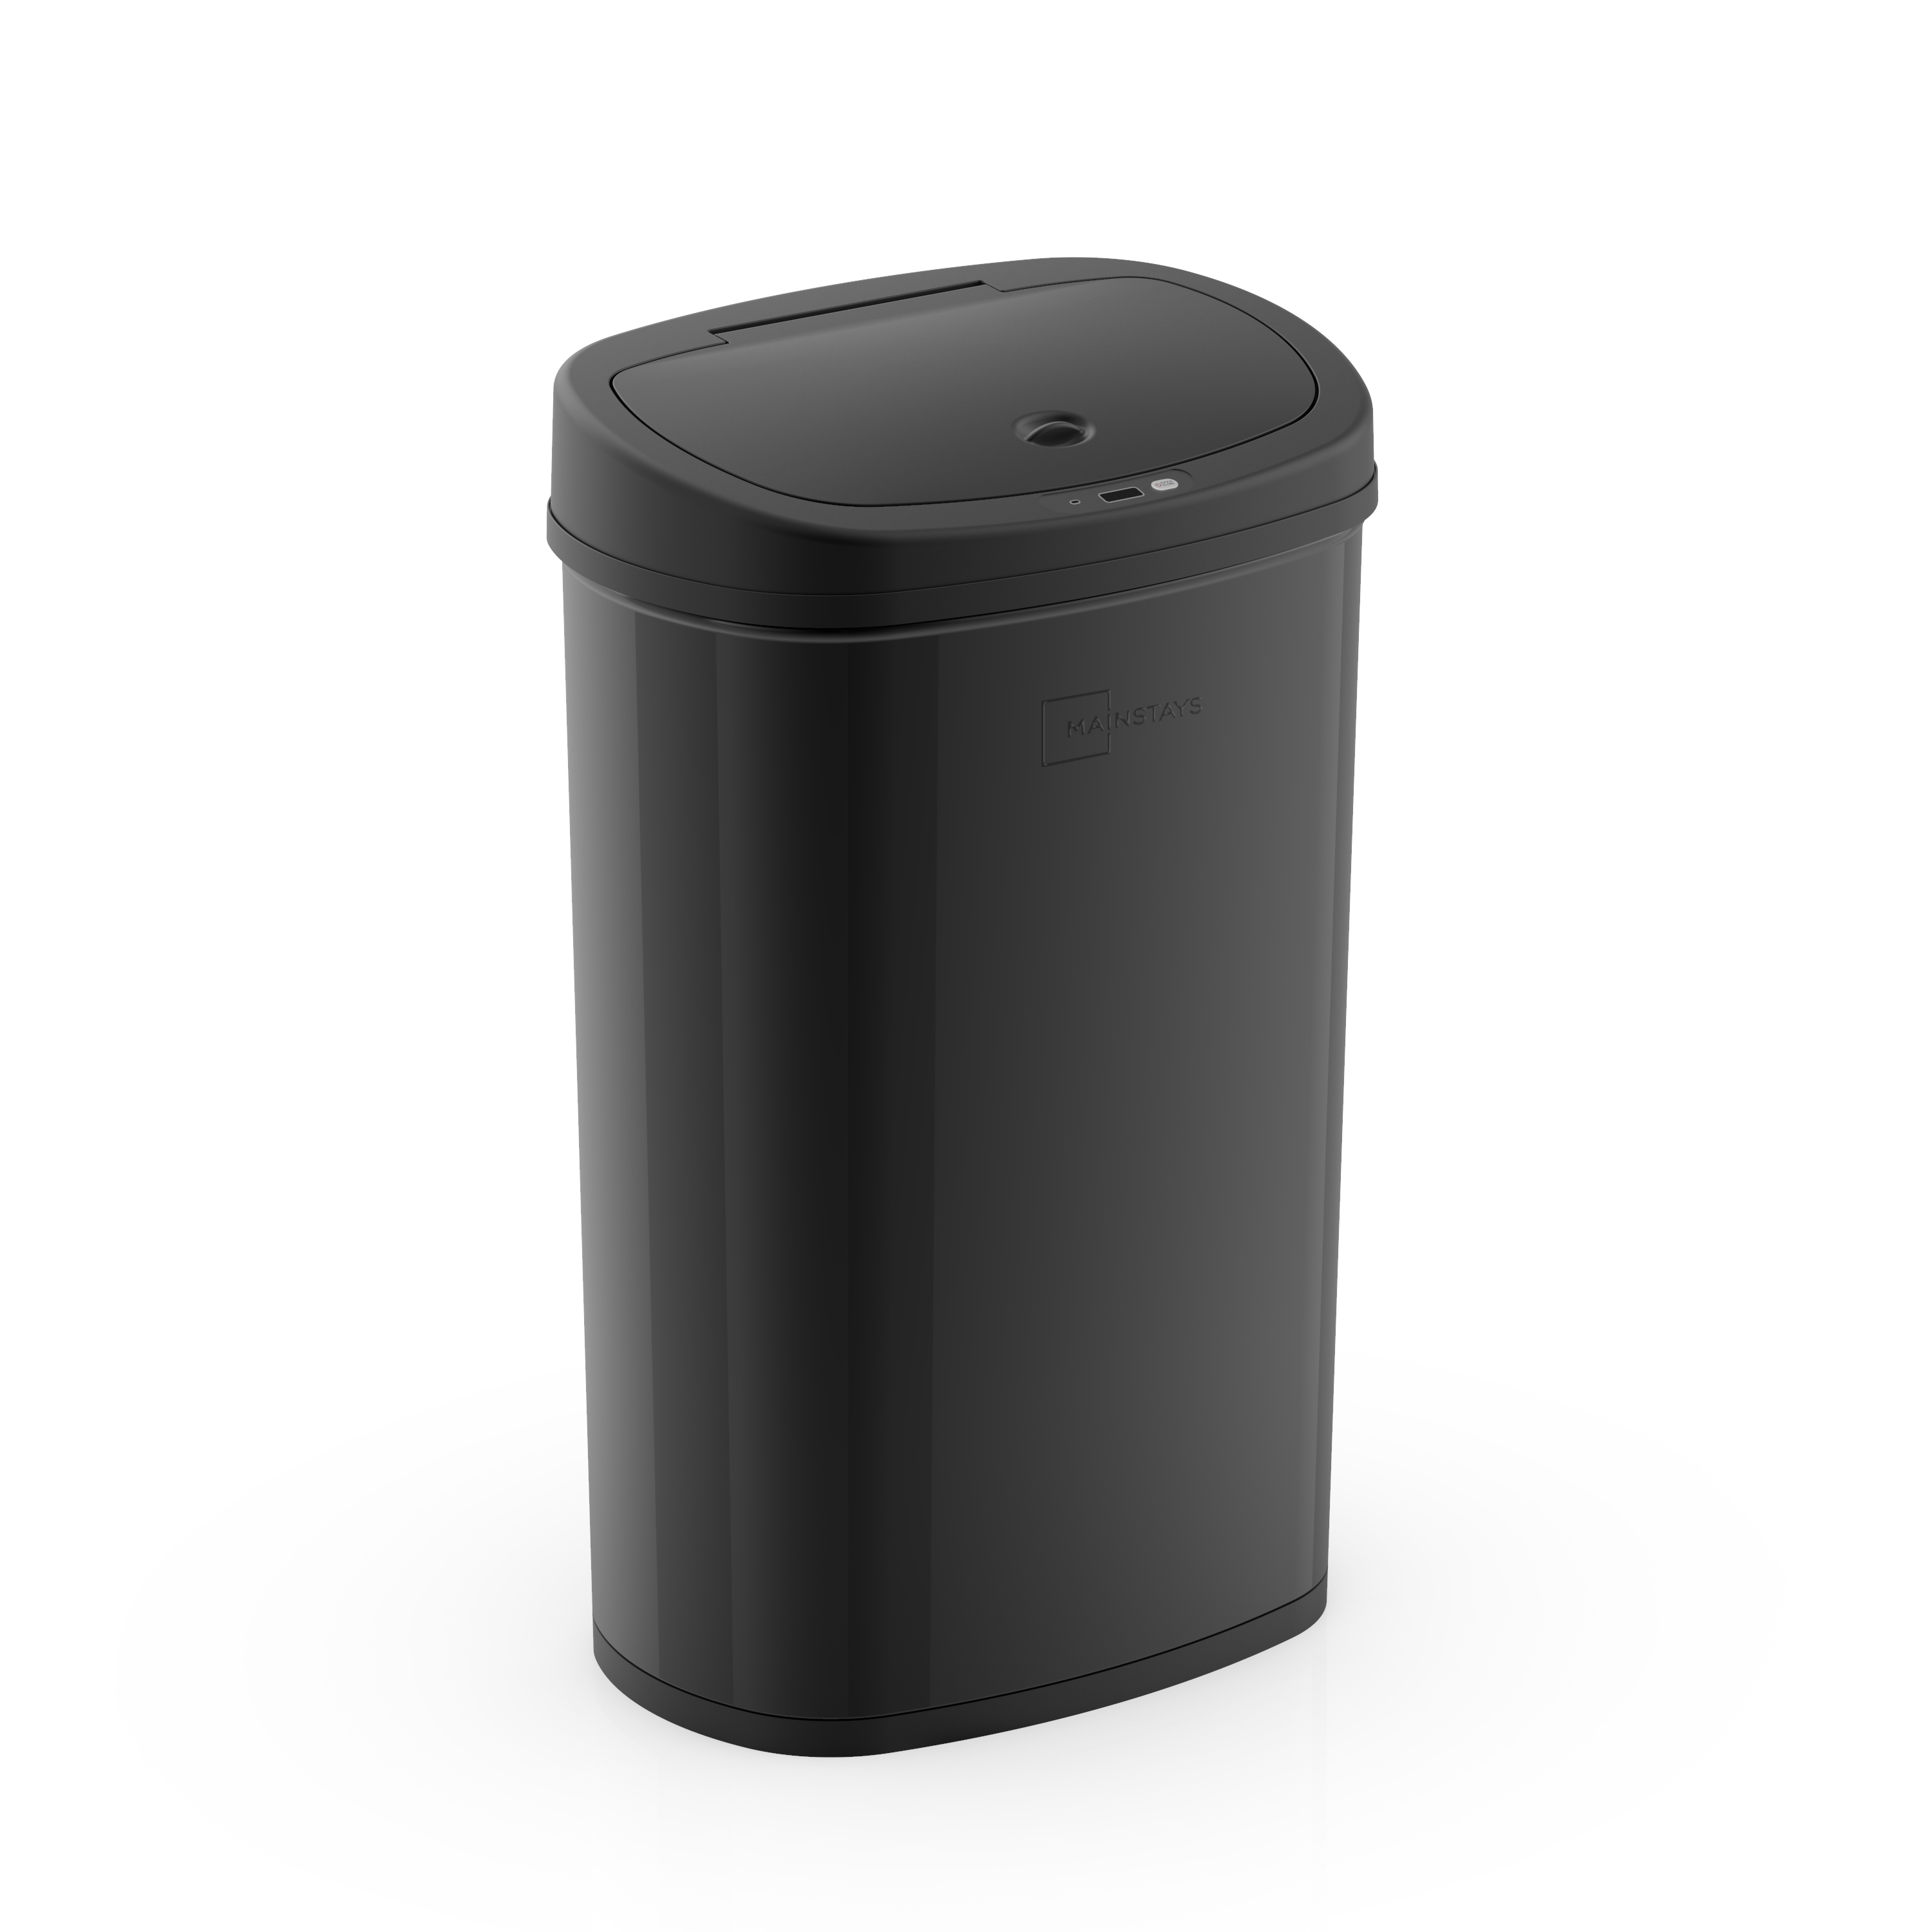 Mainstays 13.2 gal /50 L Motion Sensor Kitchen Garbage Can, Black Stainless Steel - image 1 of 12